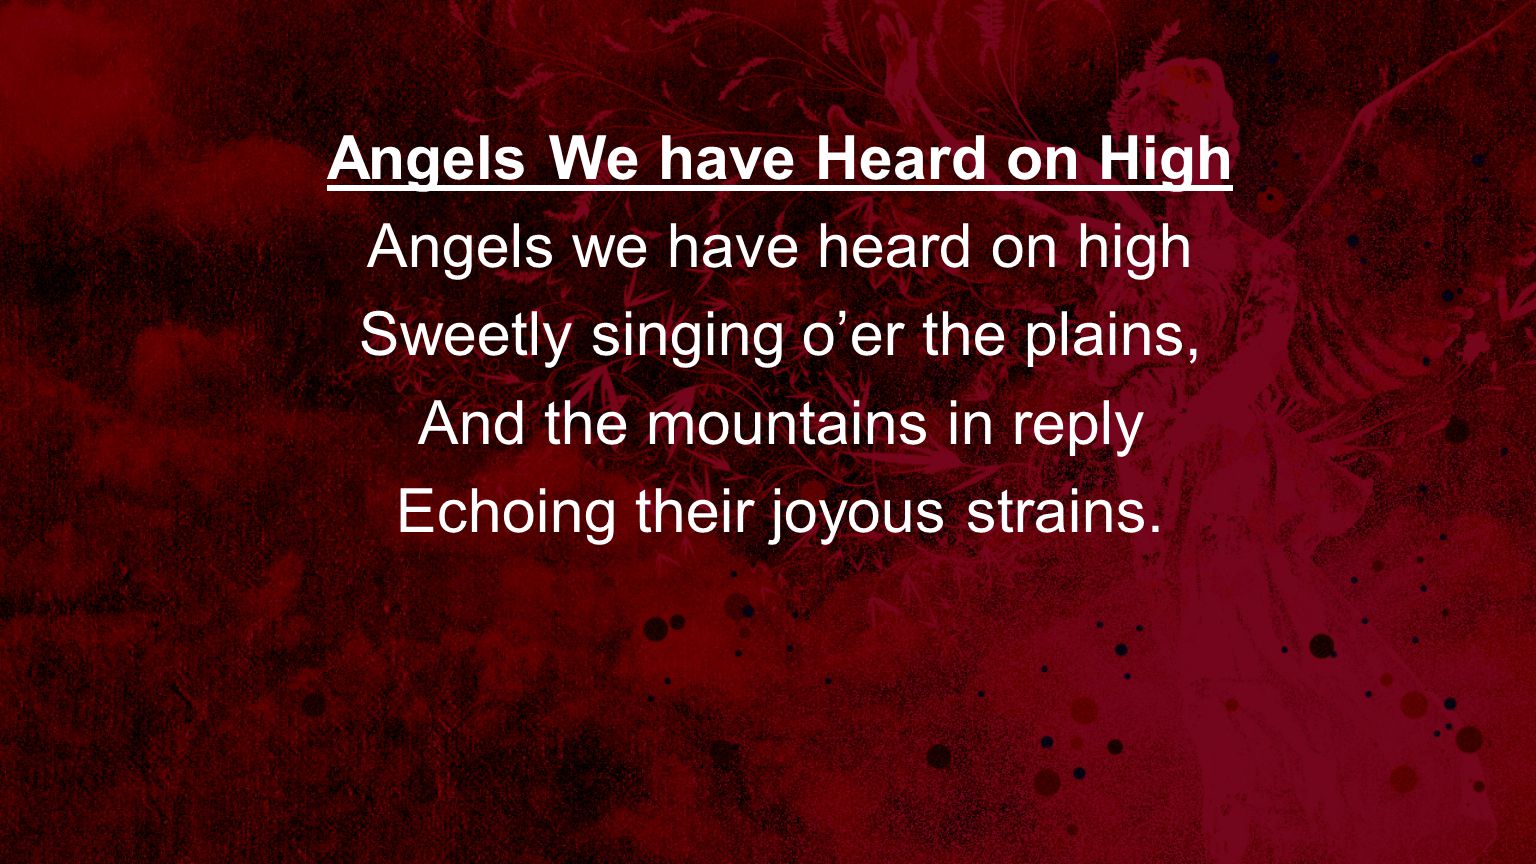 Angels We have Heard on High